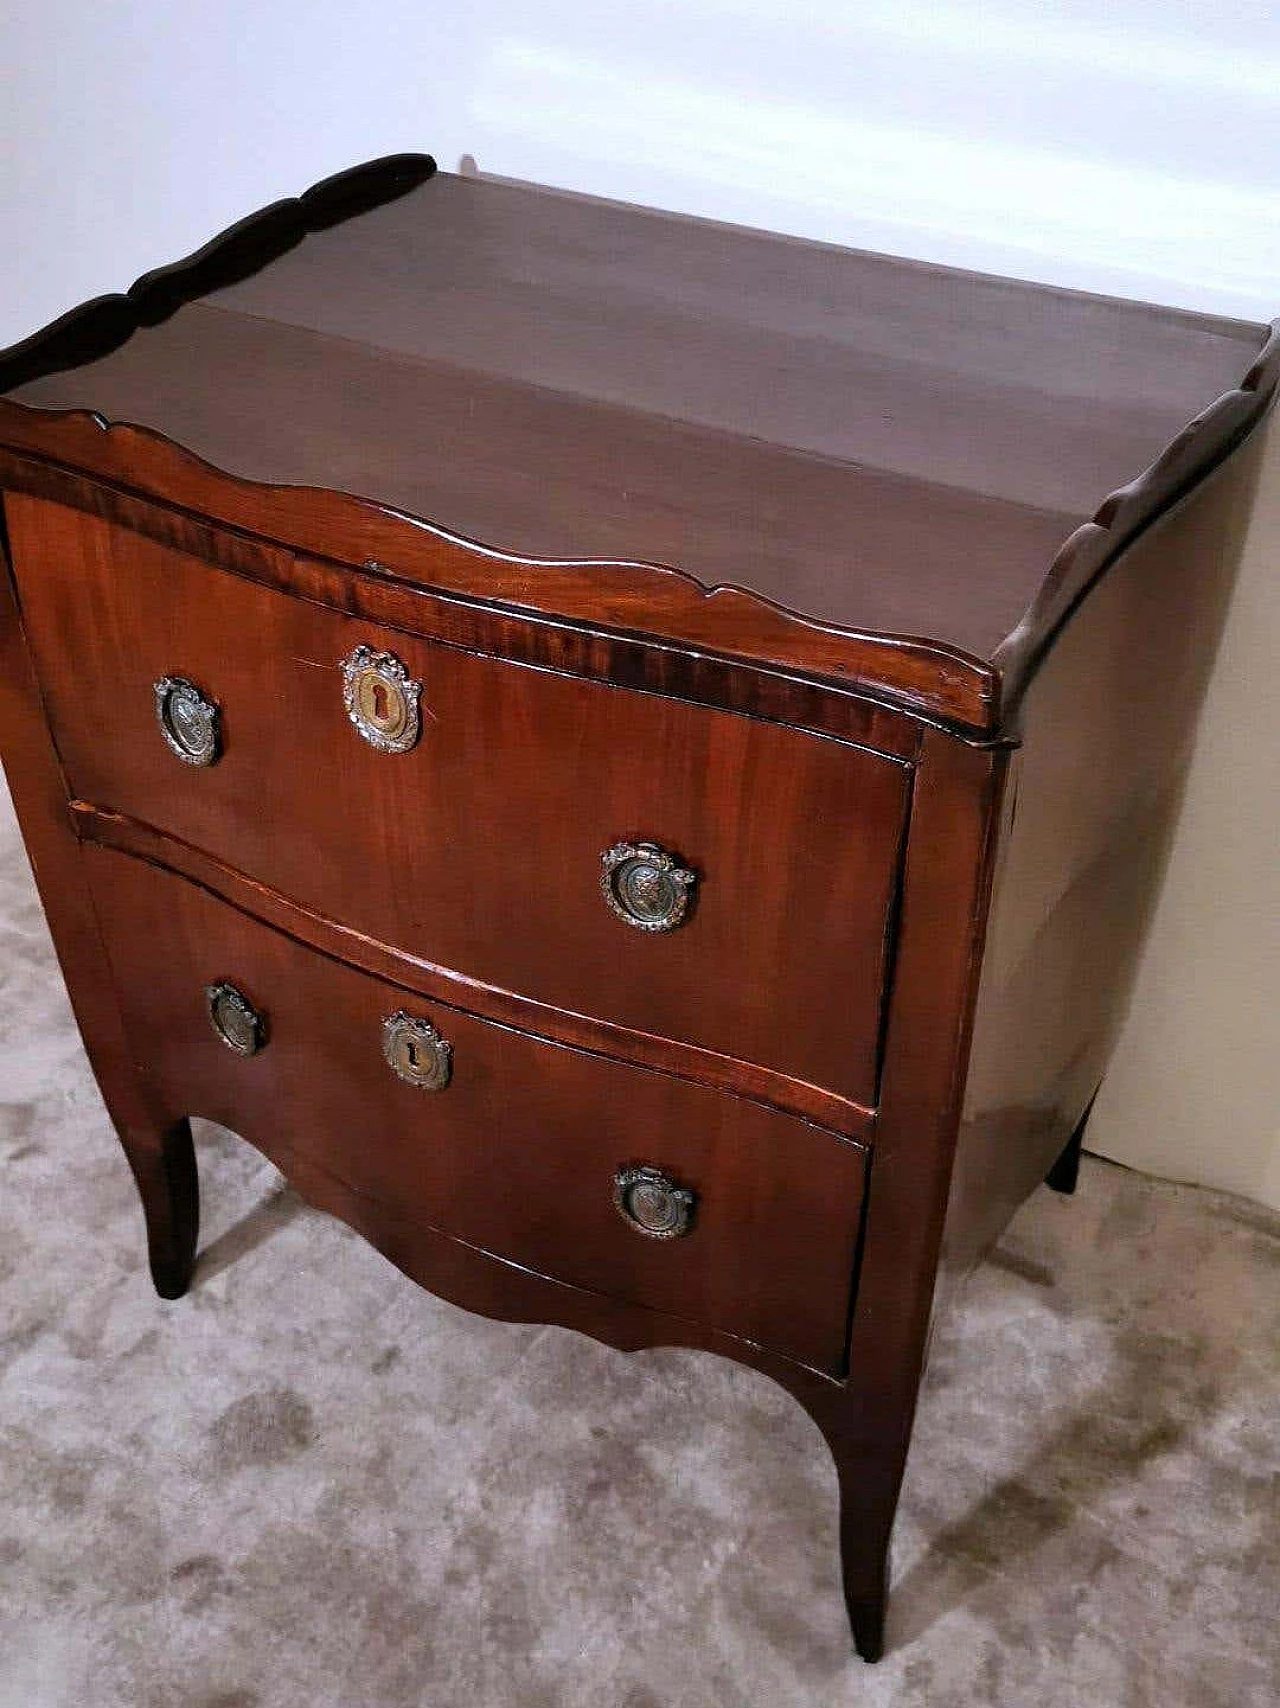 Neoclassical style chest of drawers in mahogany with bronze decorations, 18th century 1332968